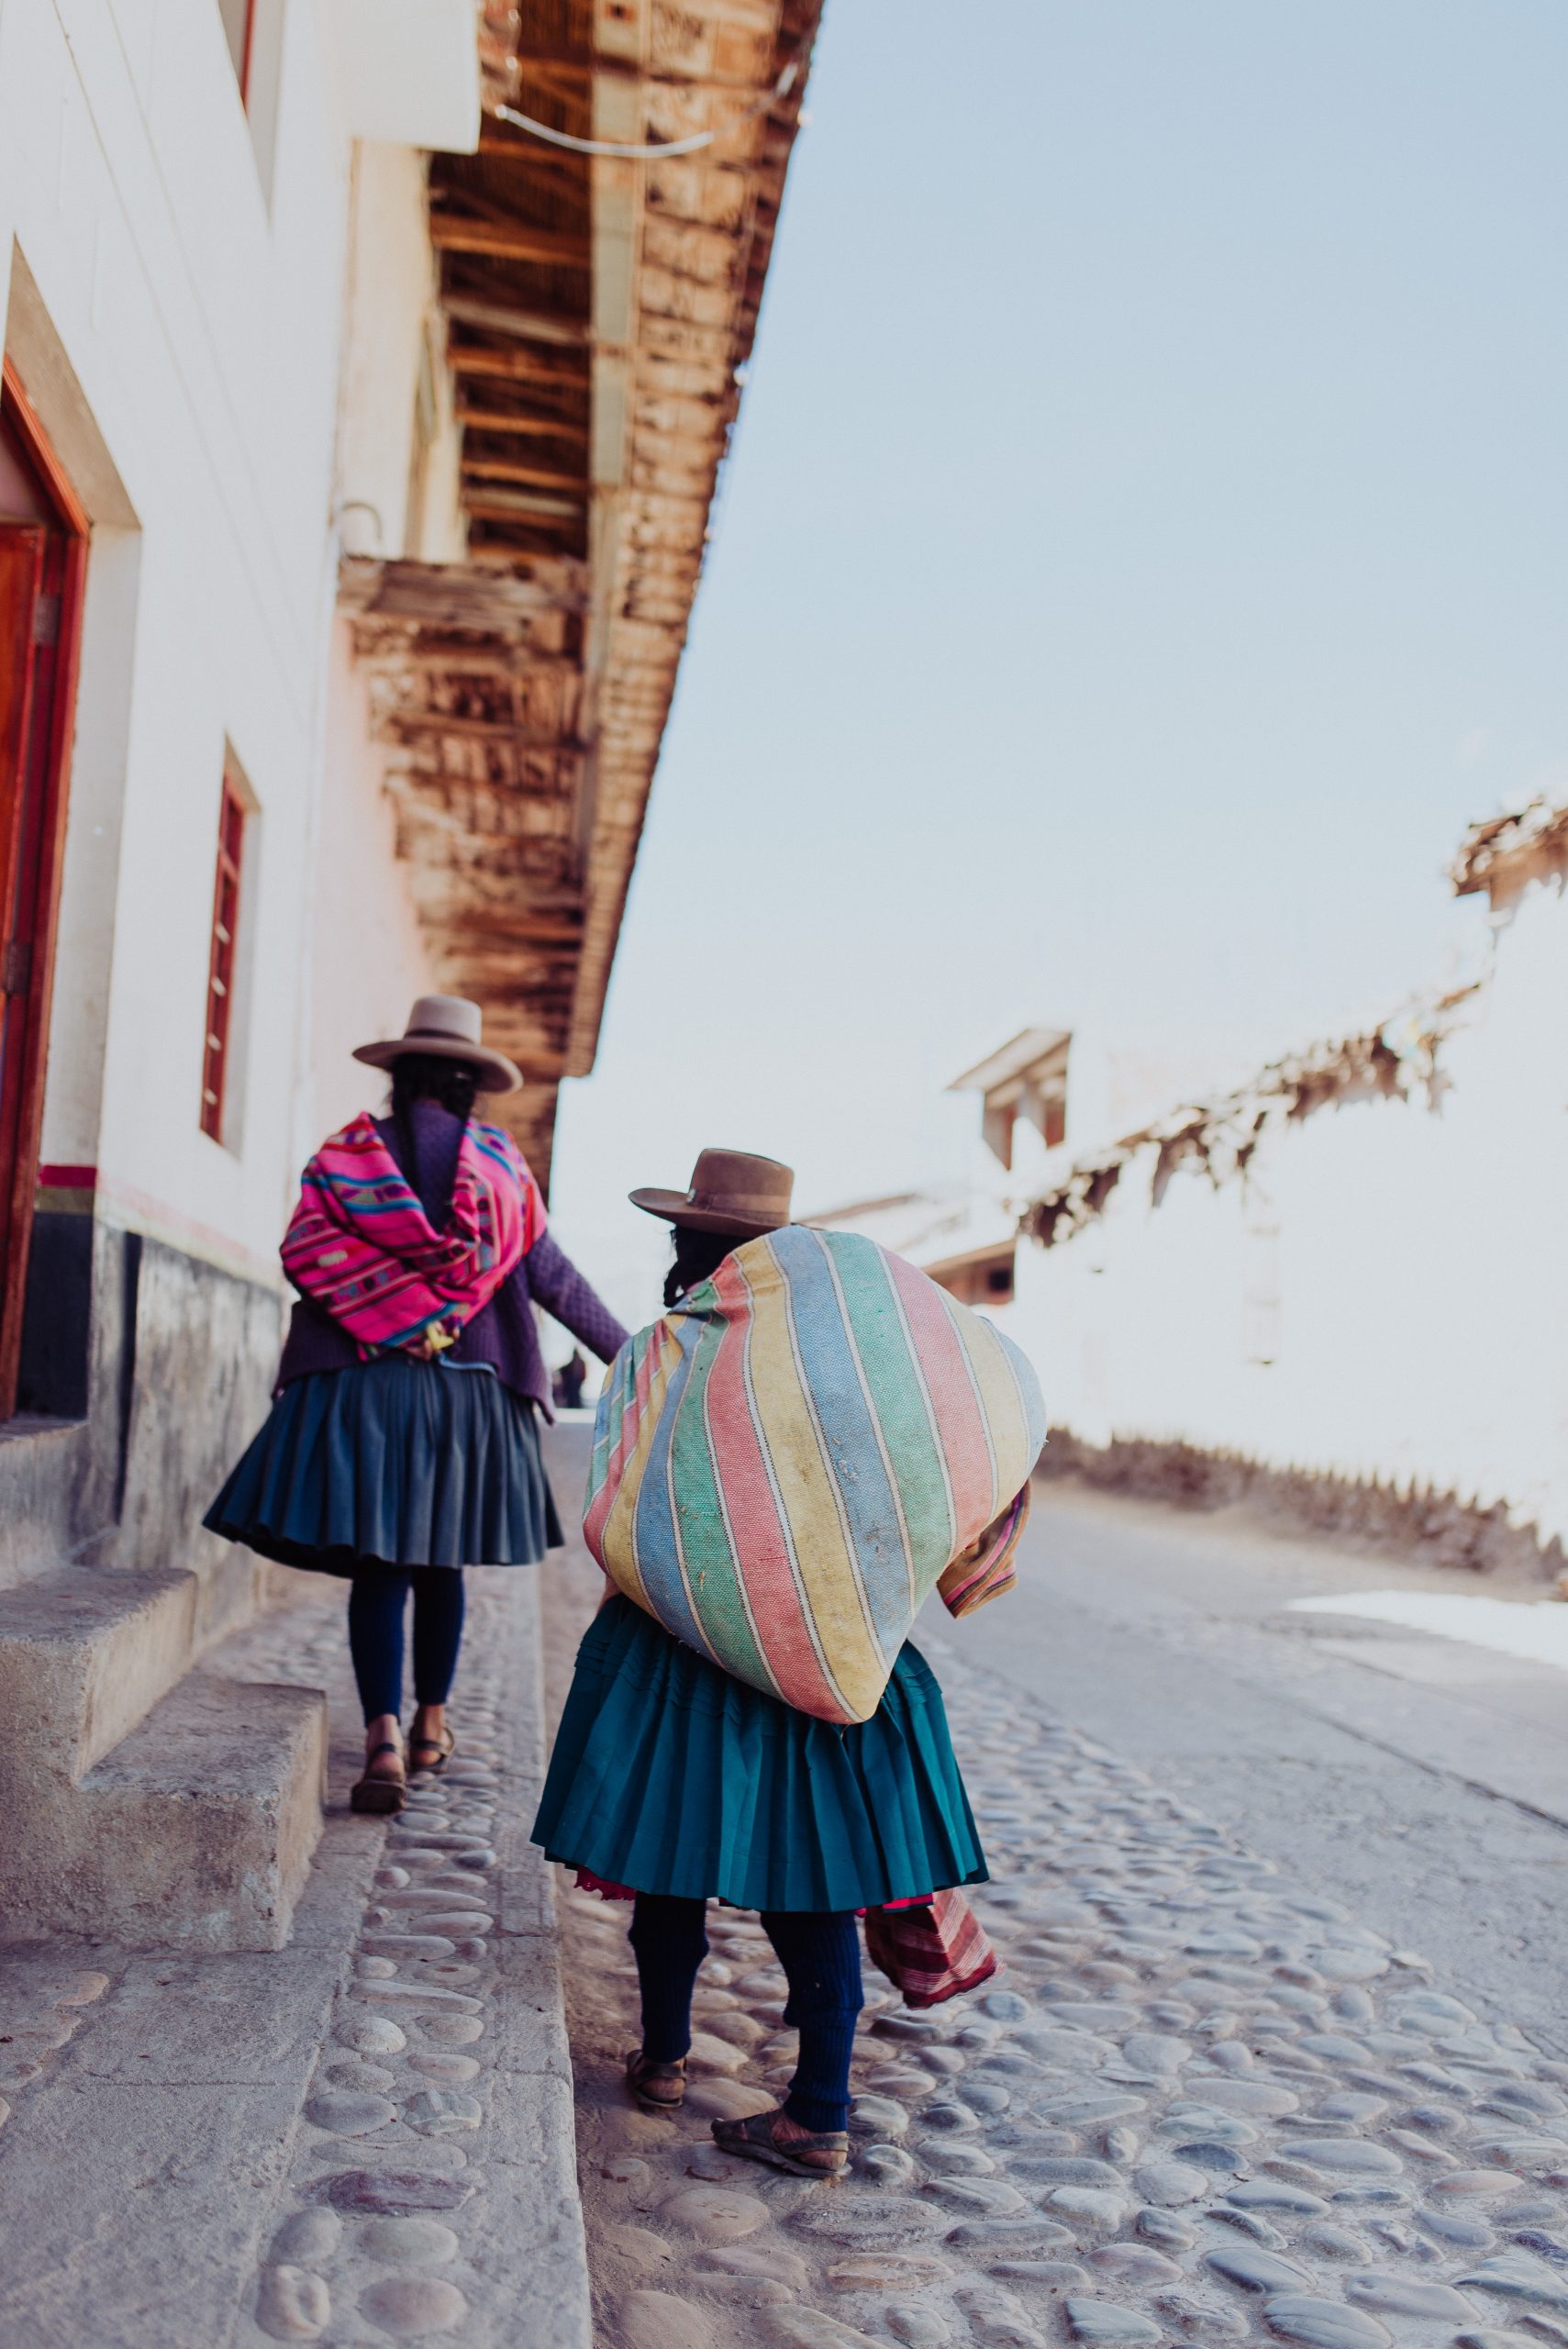 Decision-making about women in Peru